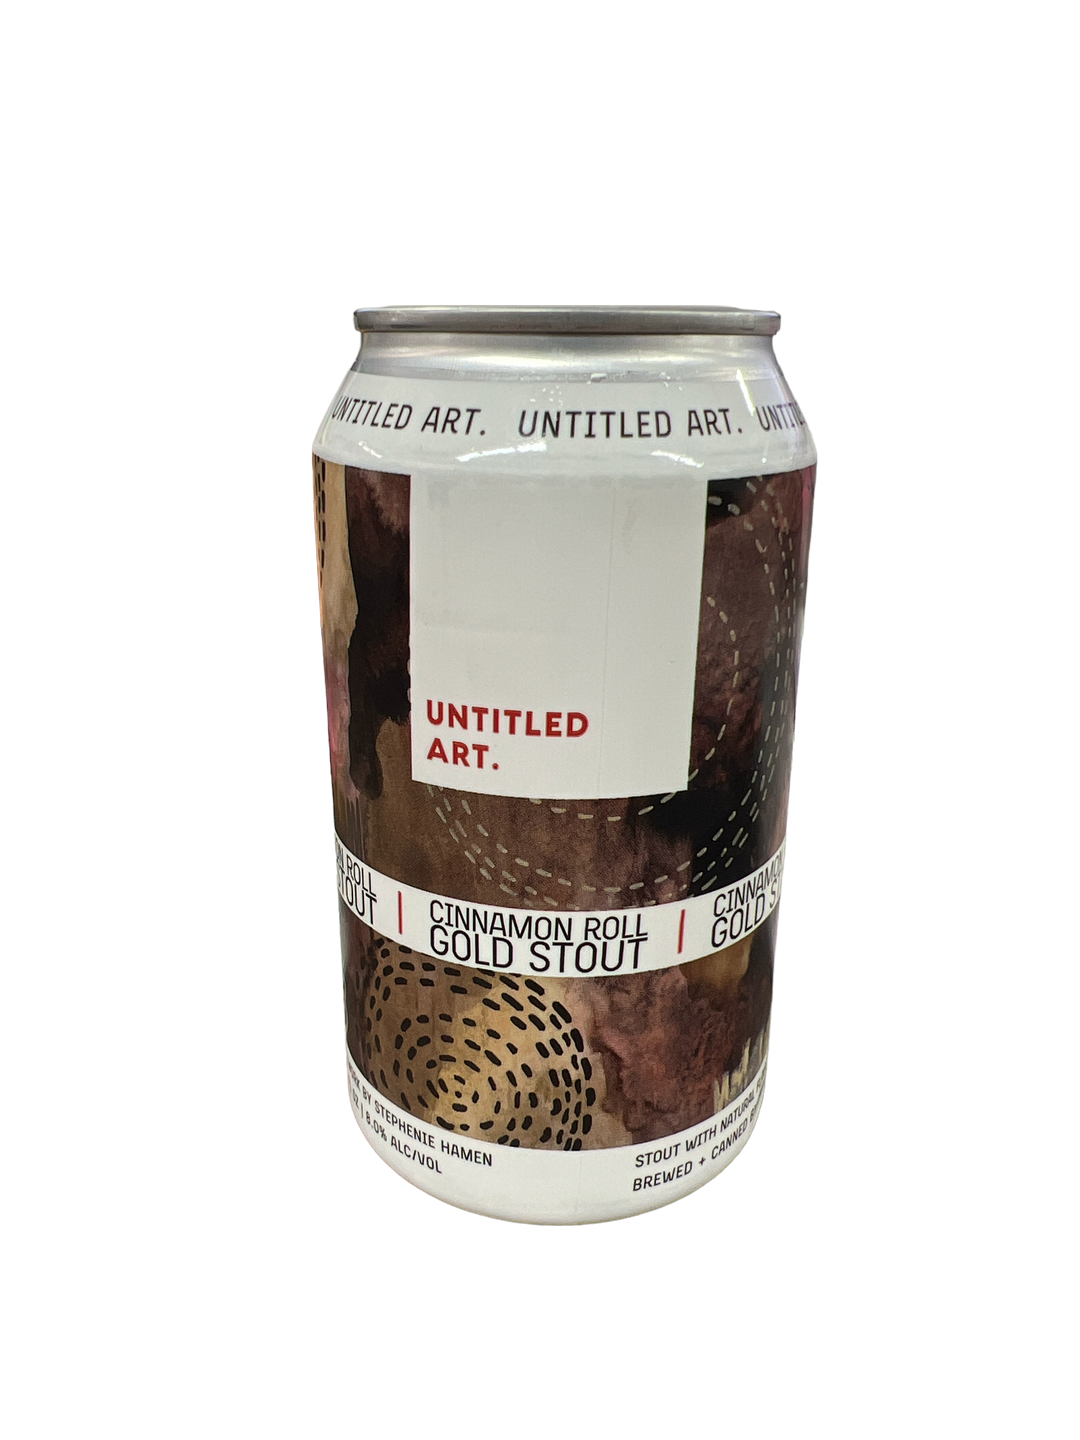 Buy Untitled Art Cinnamon Roll Gold Stout Online -Craft City